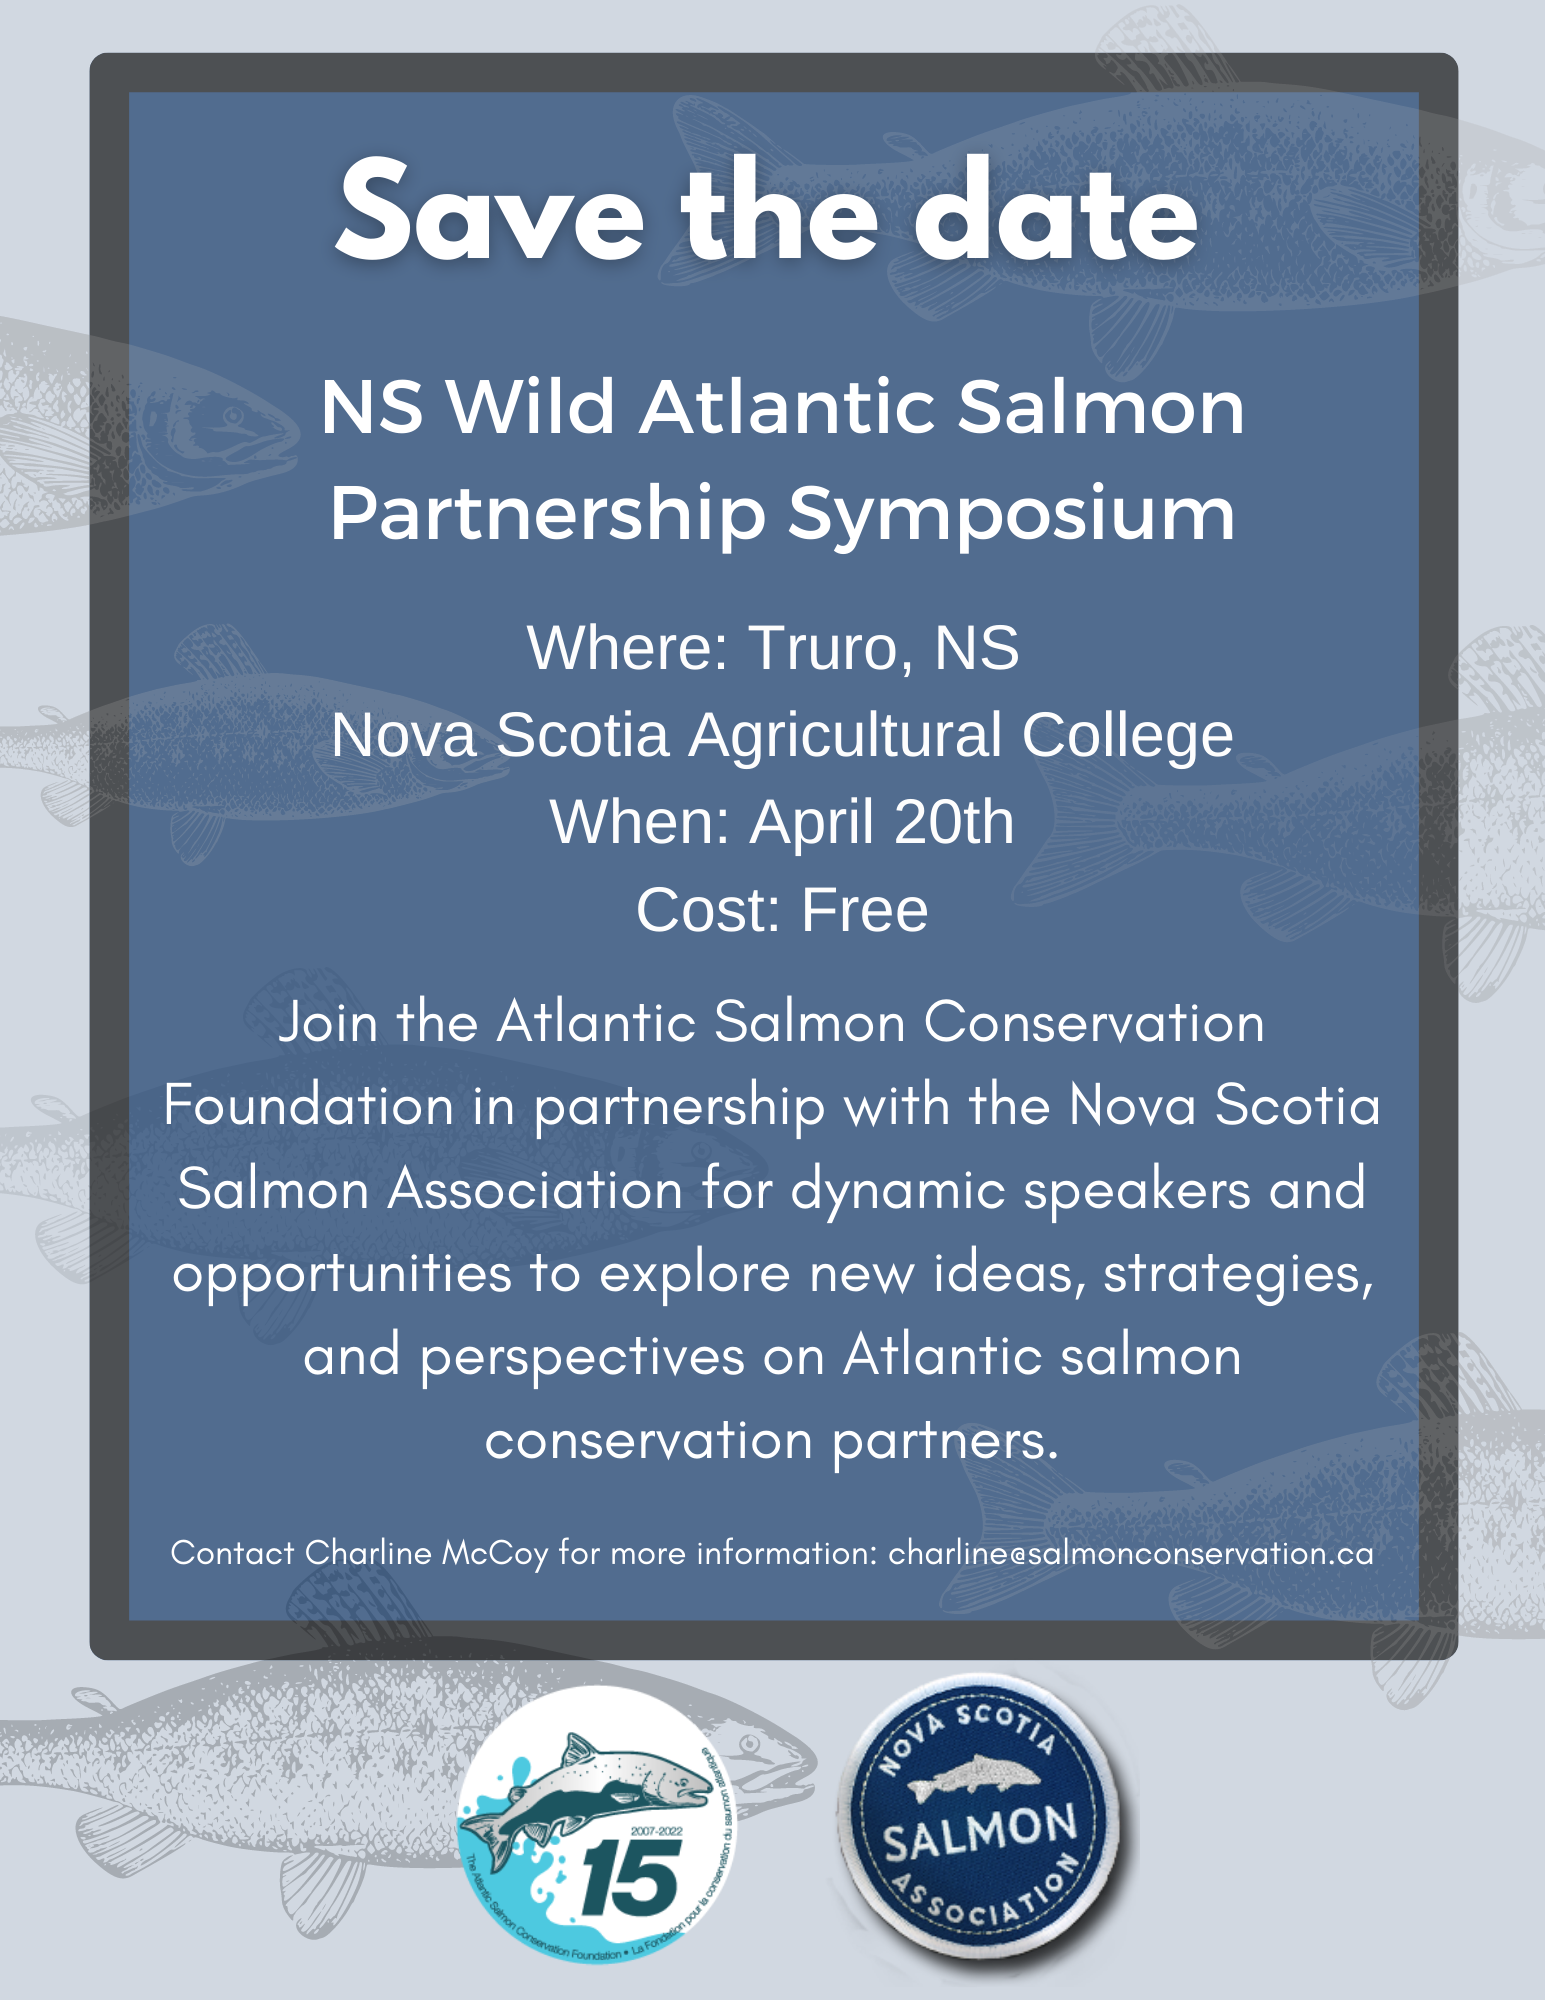  Join the Atlantic Salmon Conservation Foundation in partnership with the Nova Scotia Salmon Association for dynamic speakers and opportunities to explore new ideas, strategies and perspectives on Atlantic salmon conservation partners.